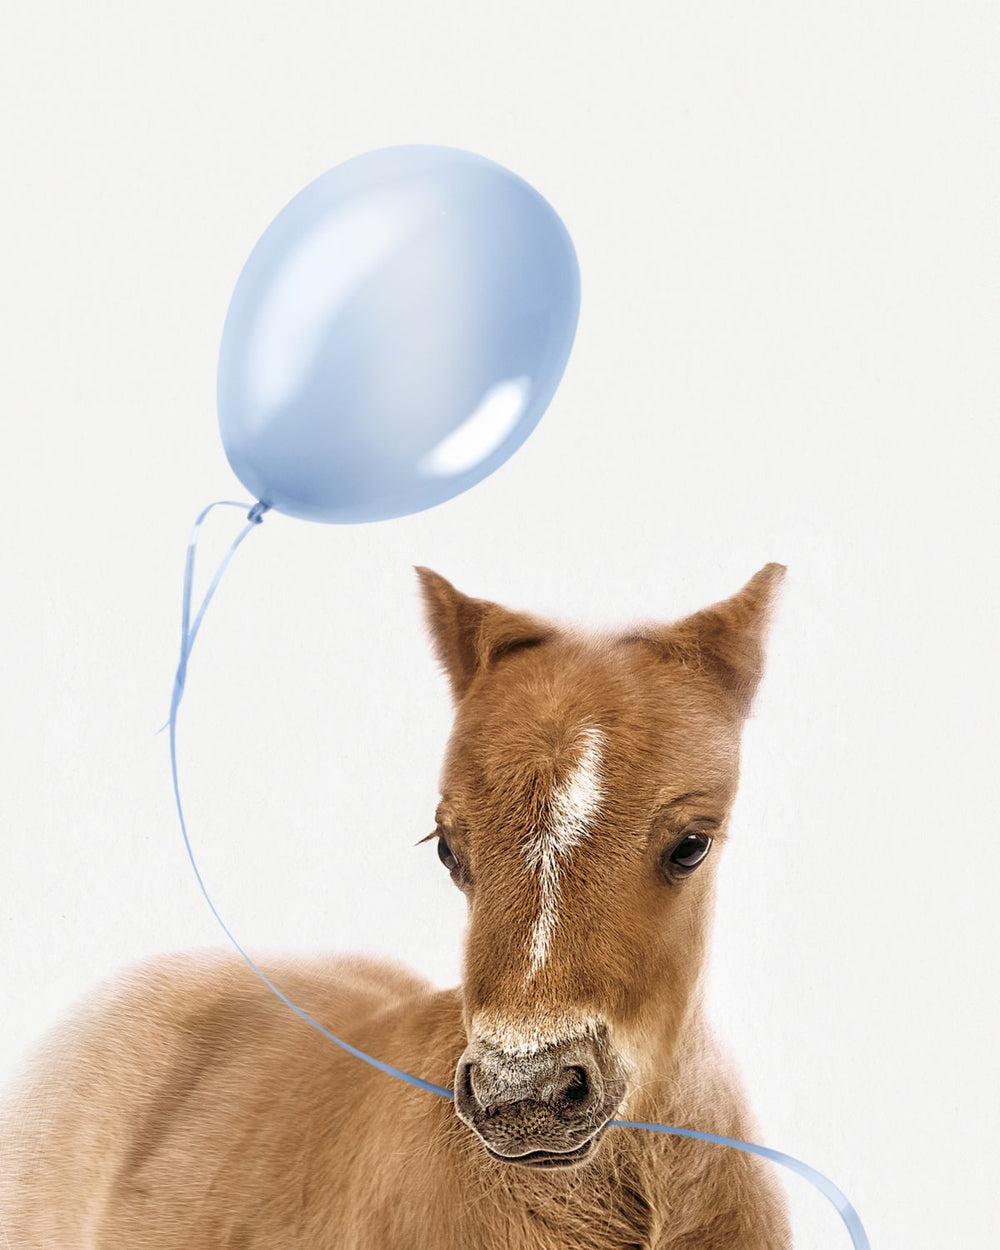 Foal And Blue Balloon